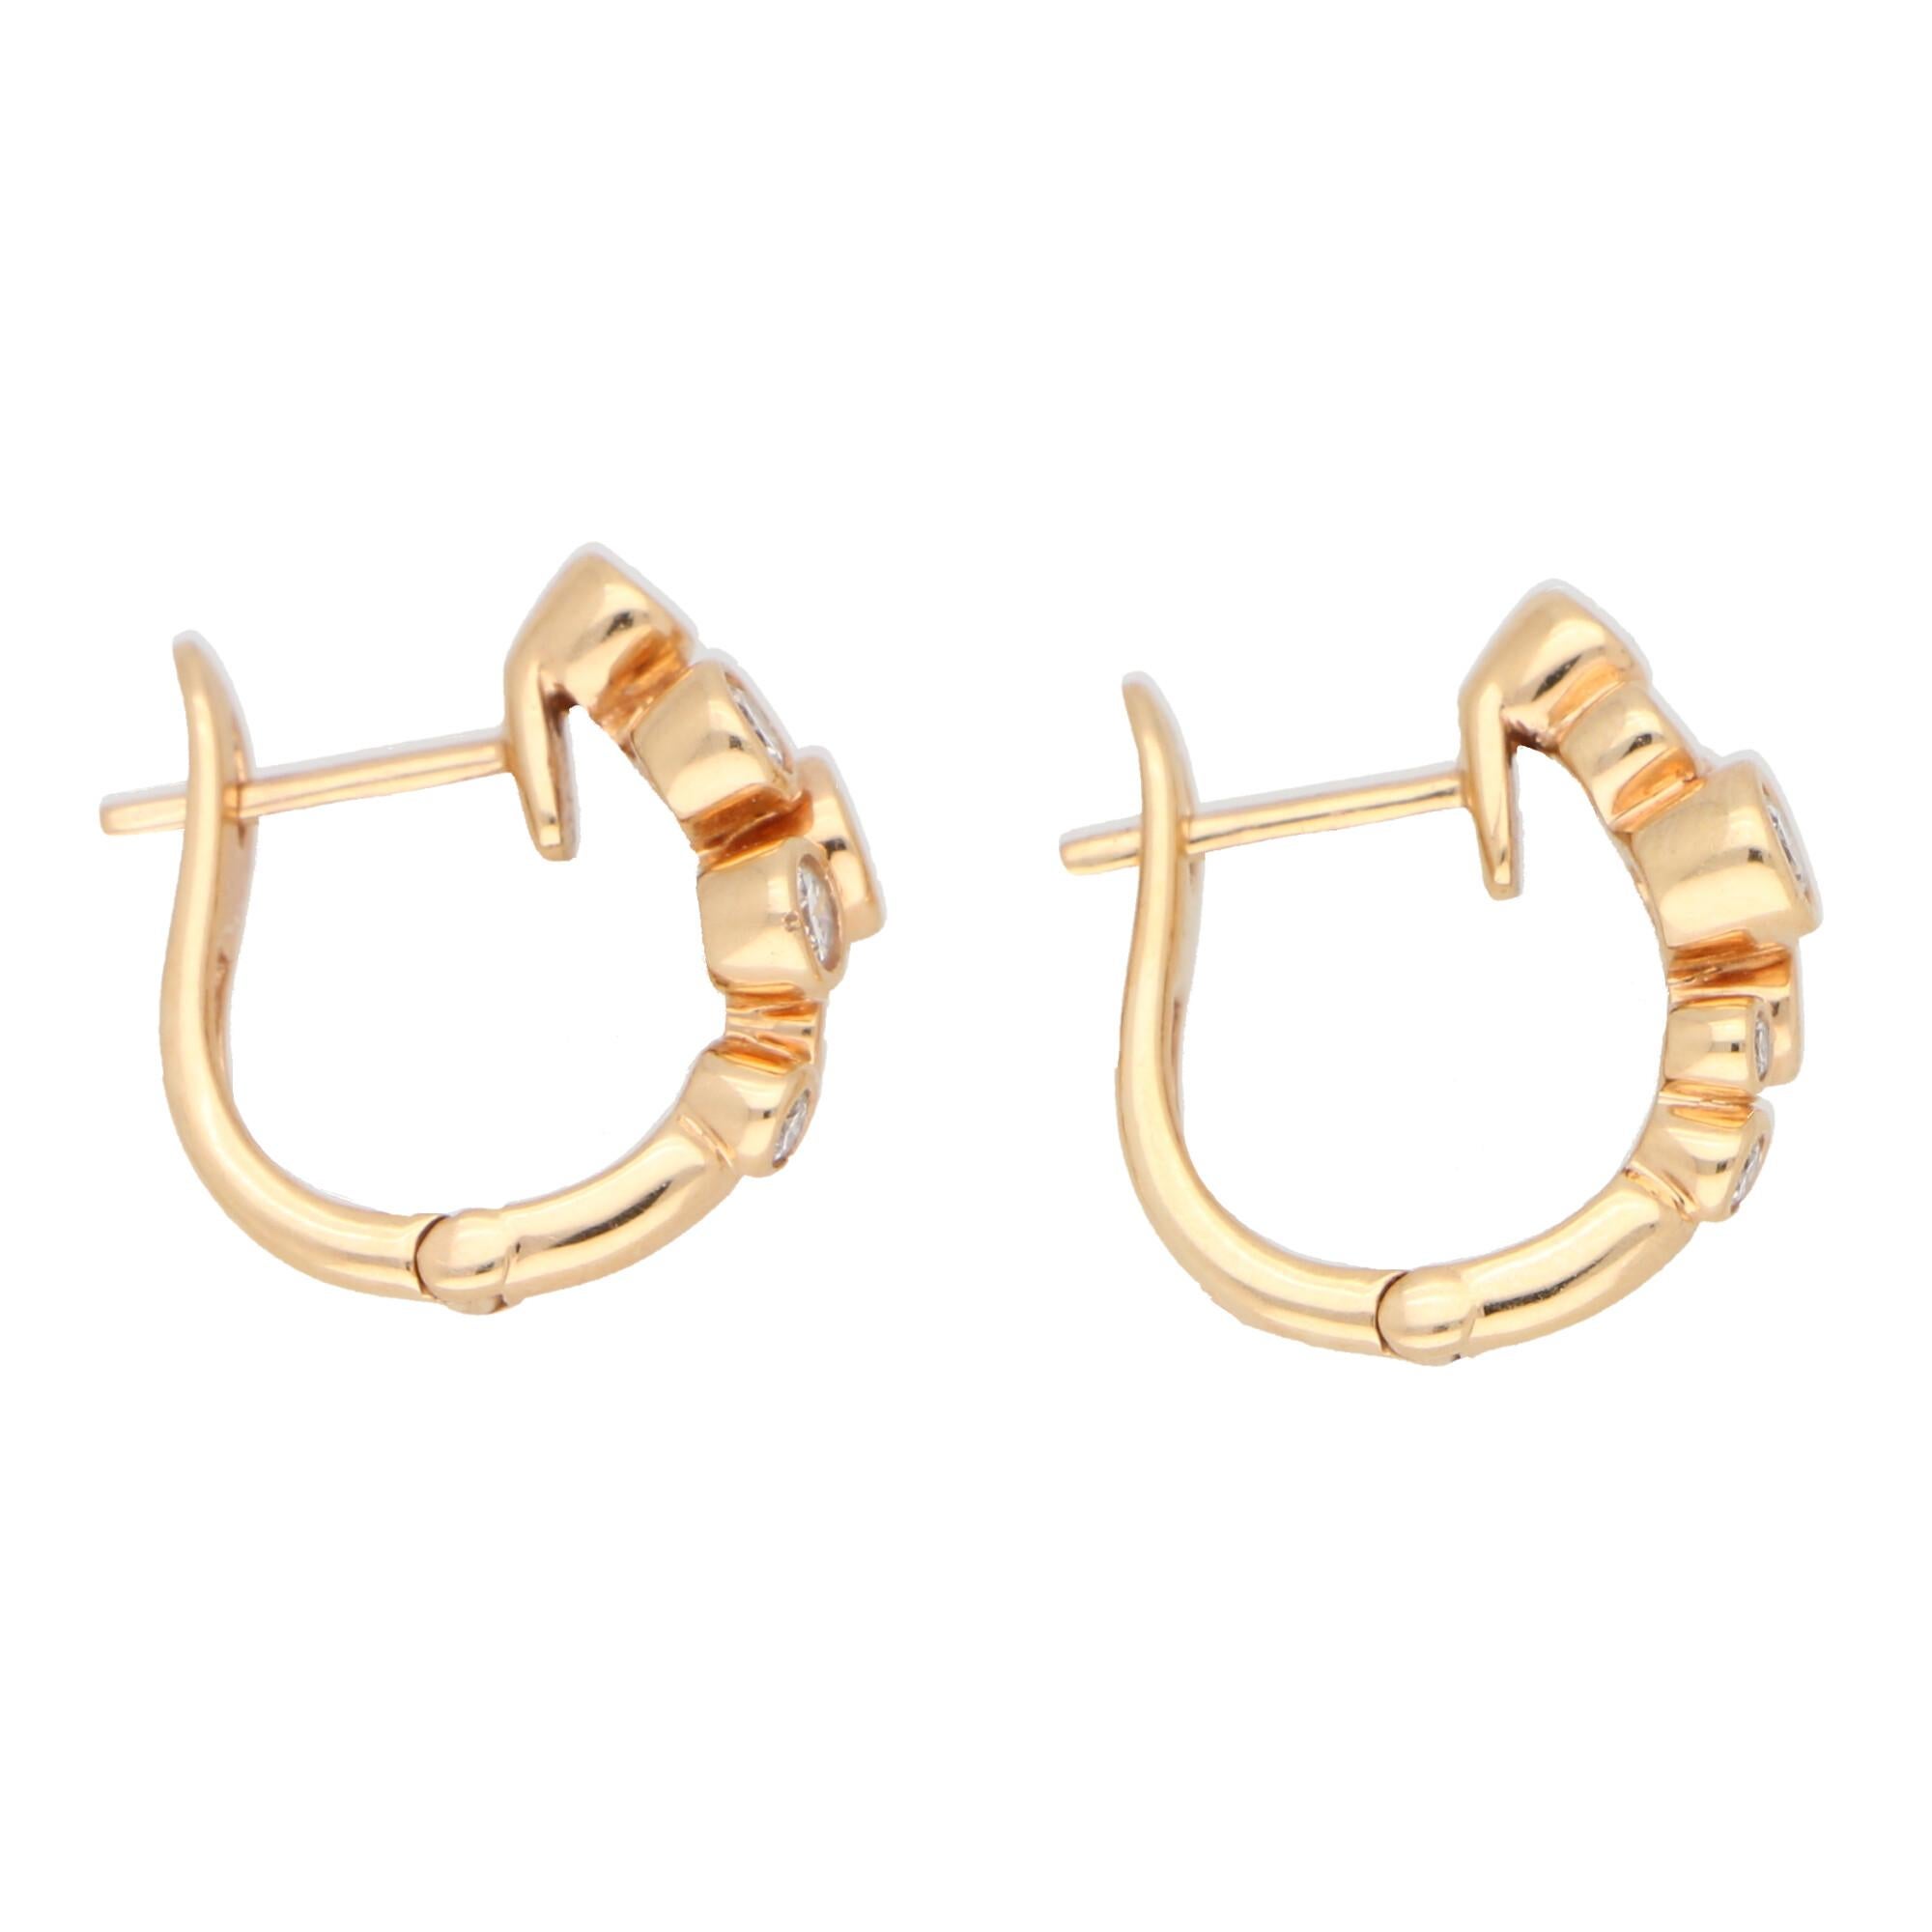 A beautiful pair of diamond huggy hoop bubble earrings set in 18k rose gold.

Each earring is set with 7 collet  set round brilliant cut diamonds of varying size which gives them a lovely spread once on the ear. The earrings themselves almost